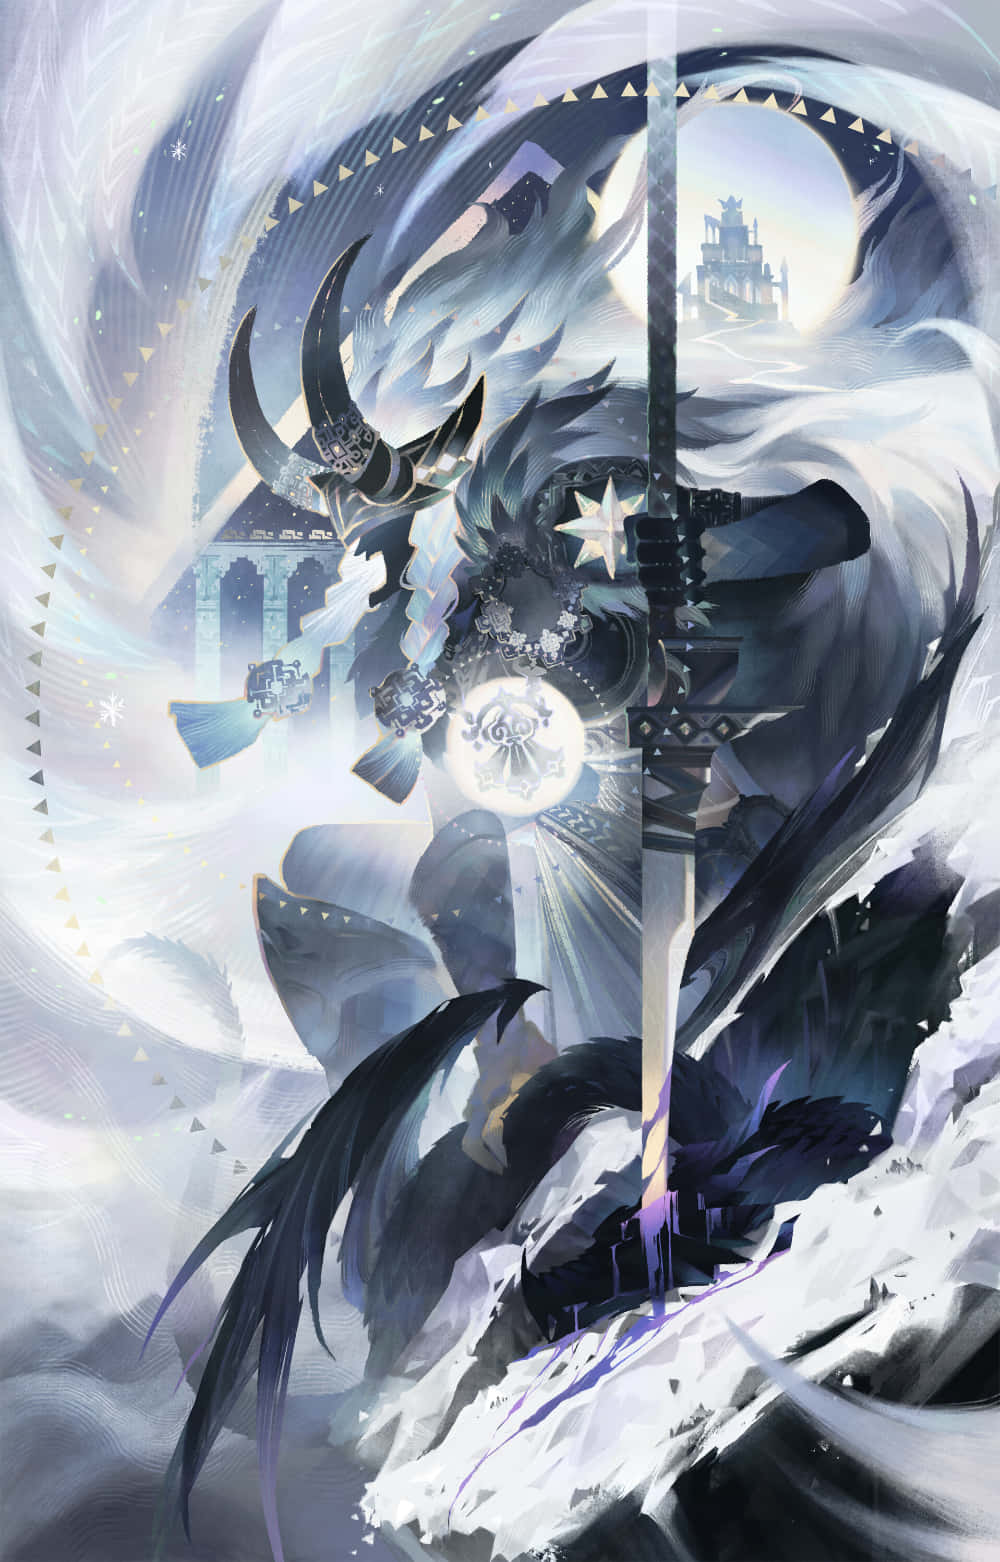 A Demon With A Sword In The Snow Wallpaper